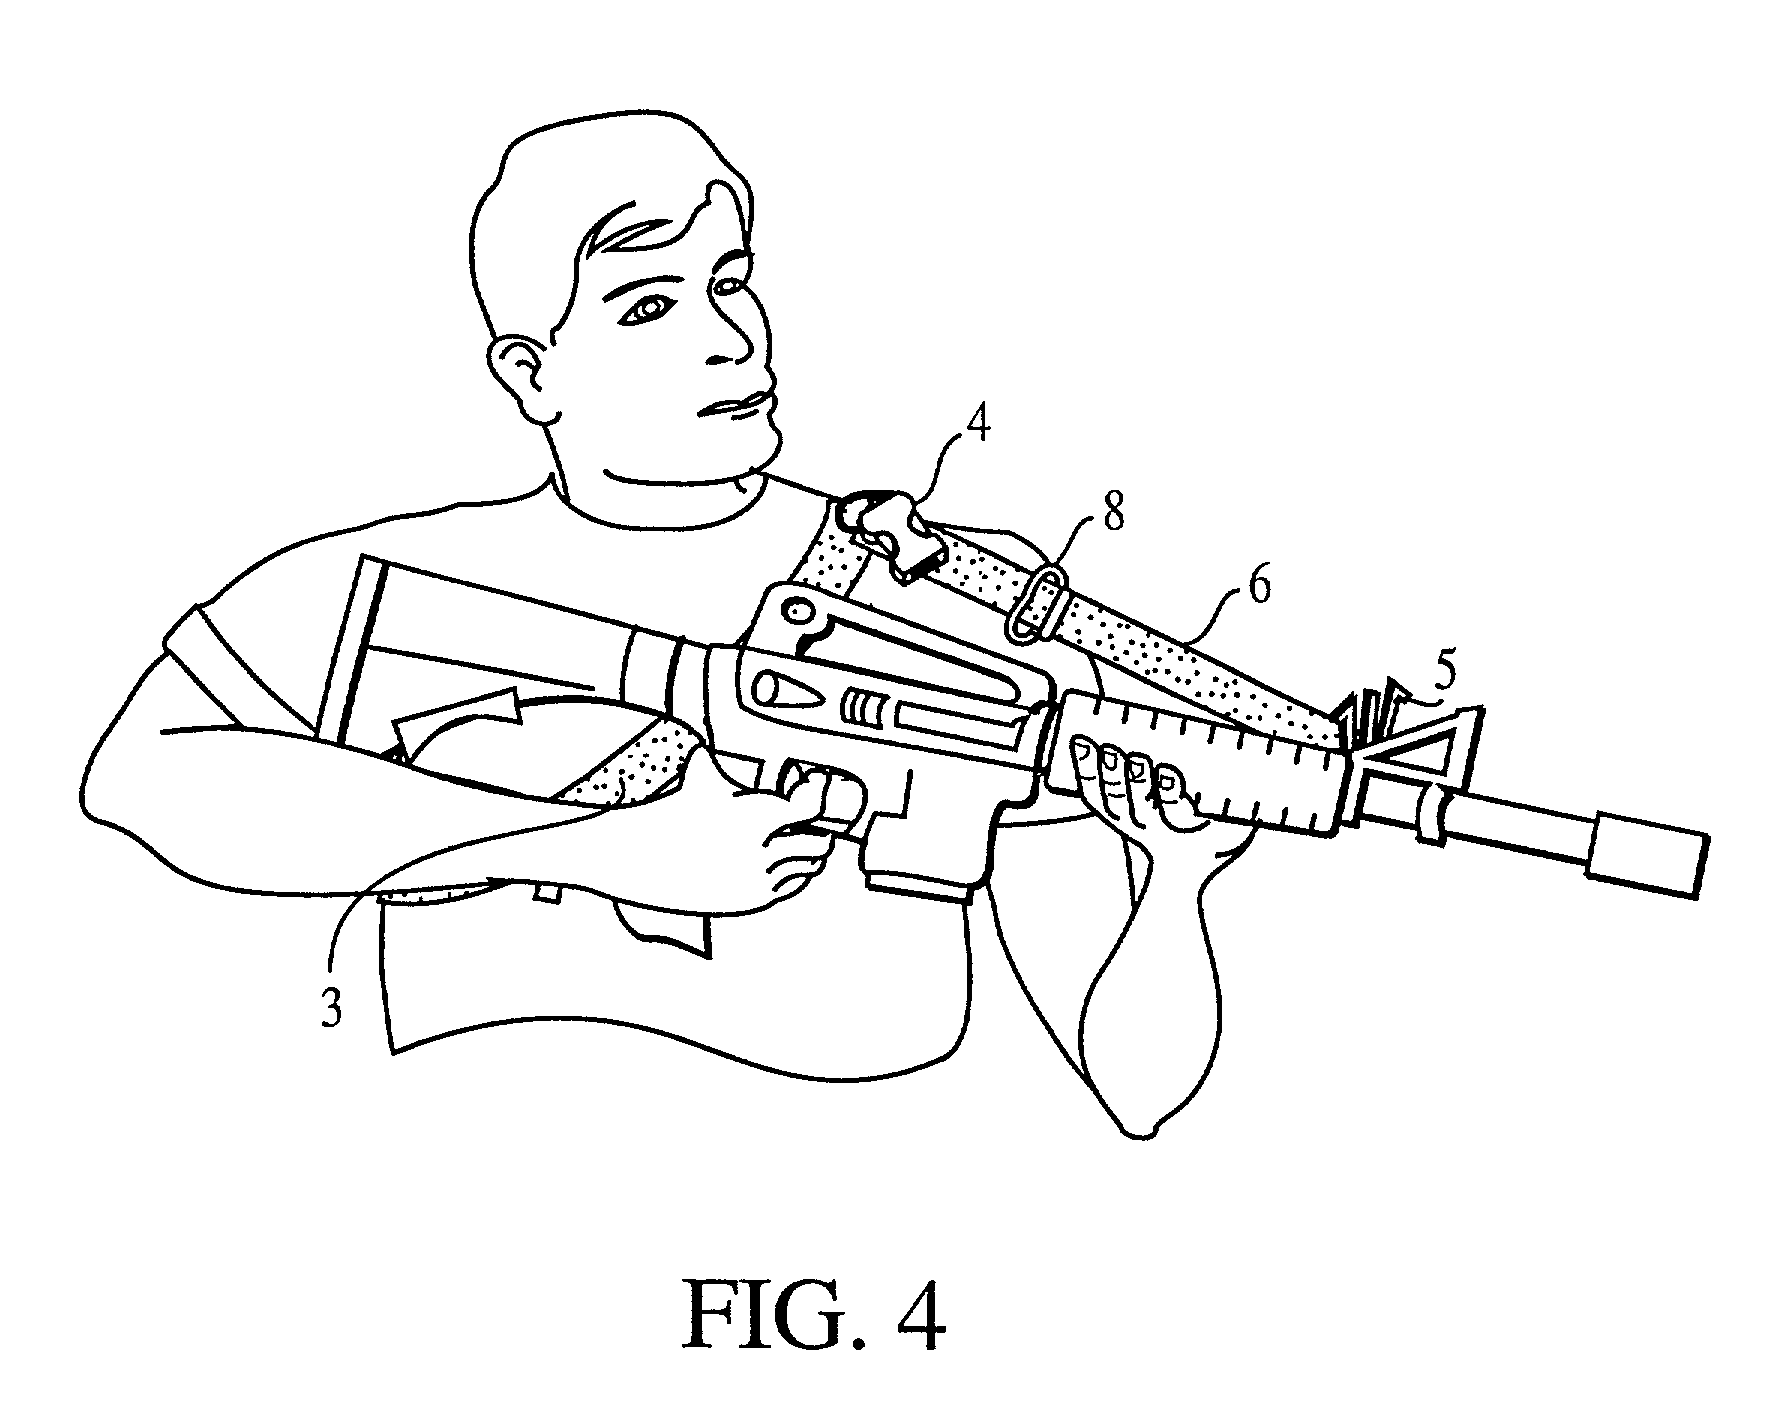 Weapon sling and attachments